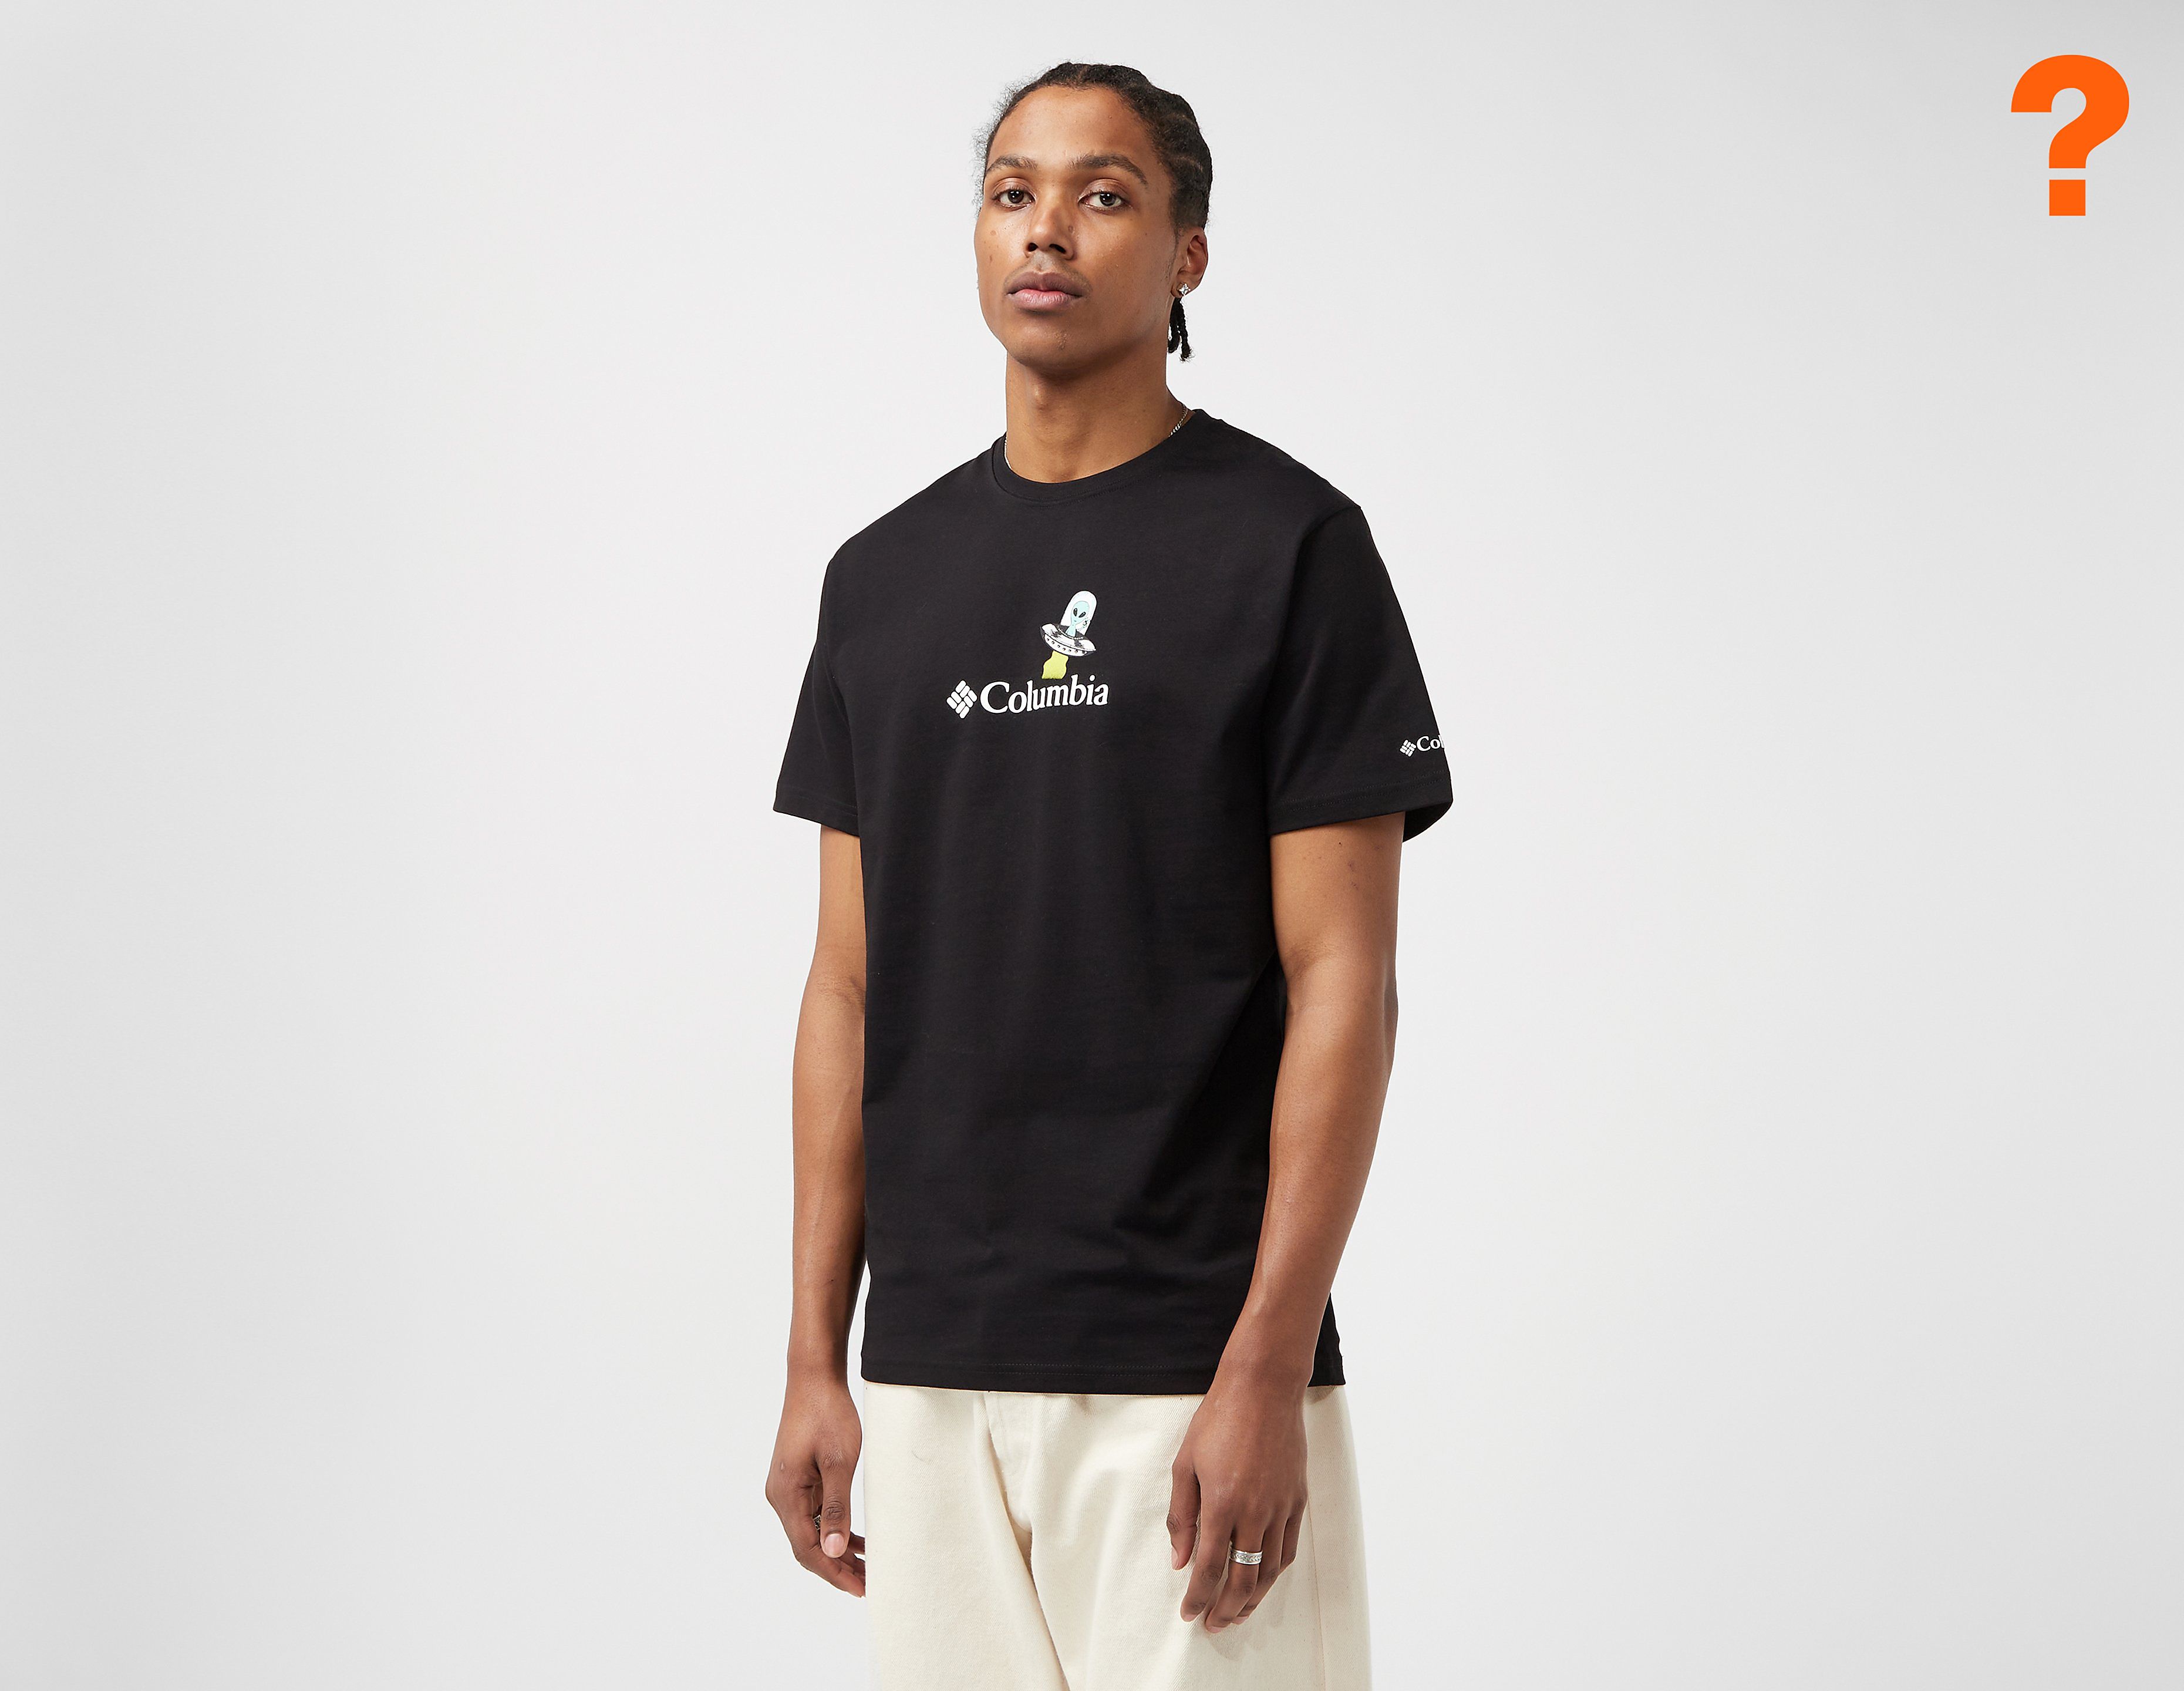 Columbia Outer Space T-Shirt - size? exclusive, Black